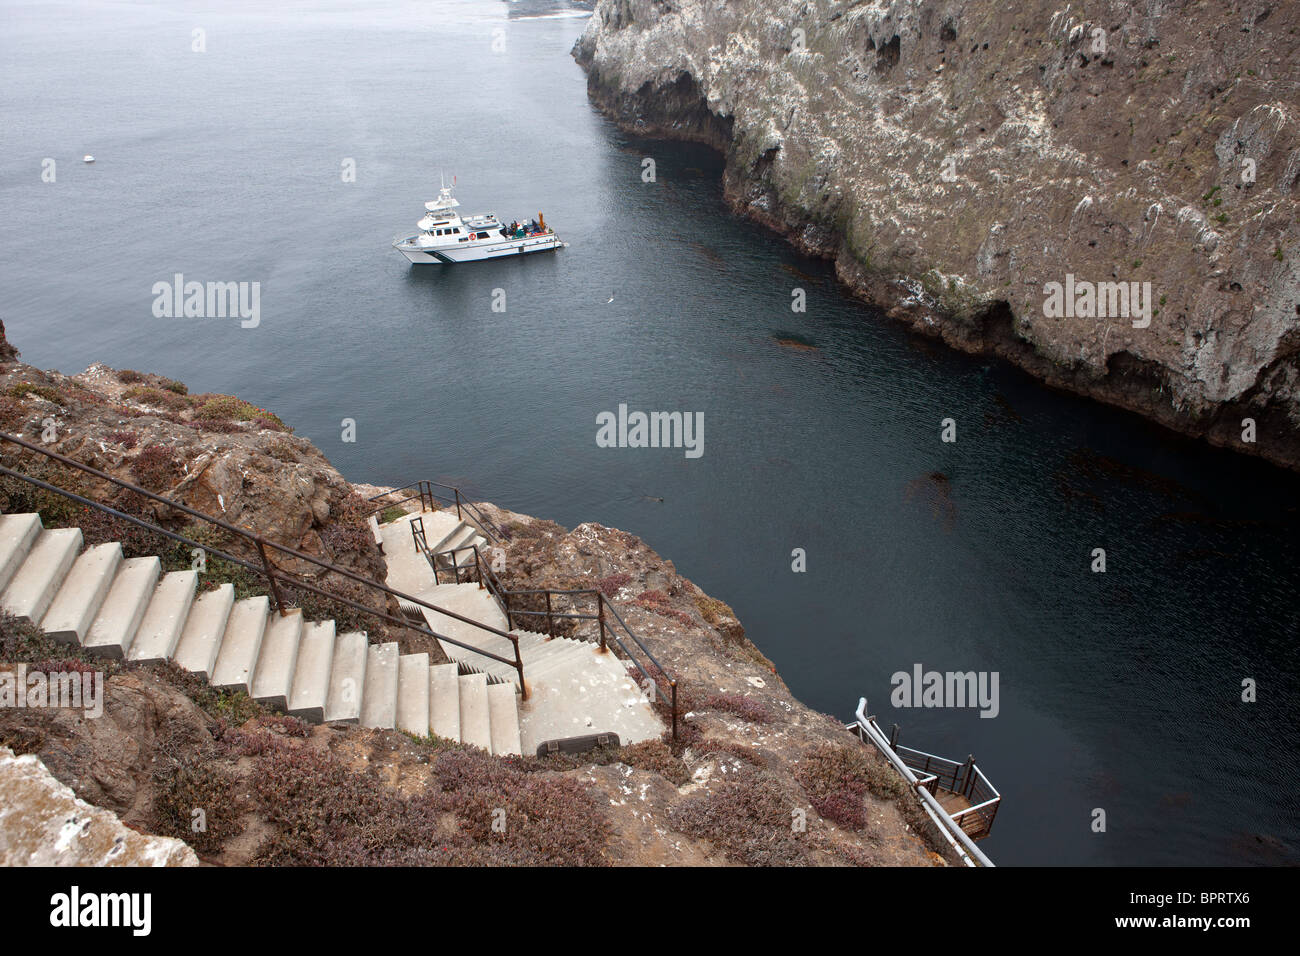 Stairs down cliff to dock, Anacapa Island, Channel Islands National Park, California, United States of America Stock Photo